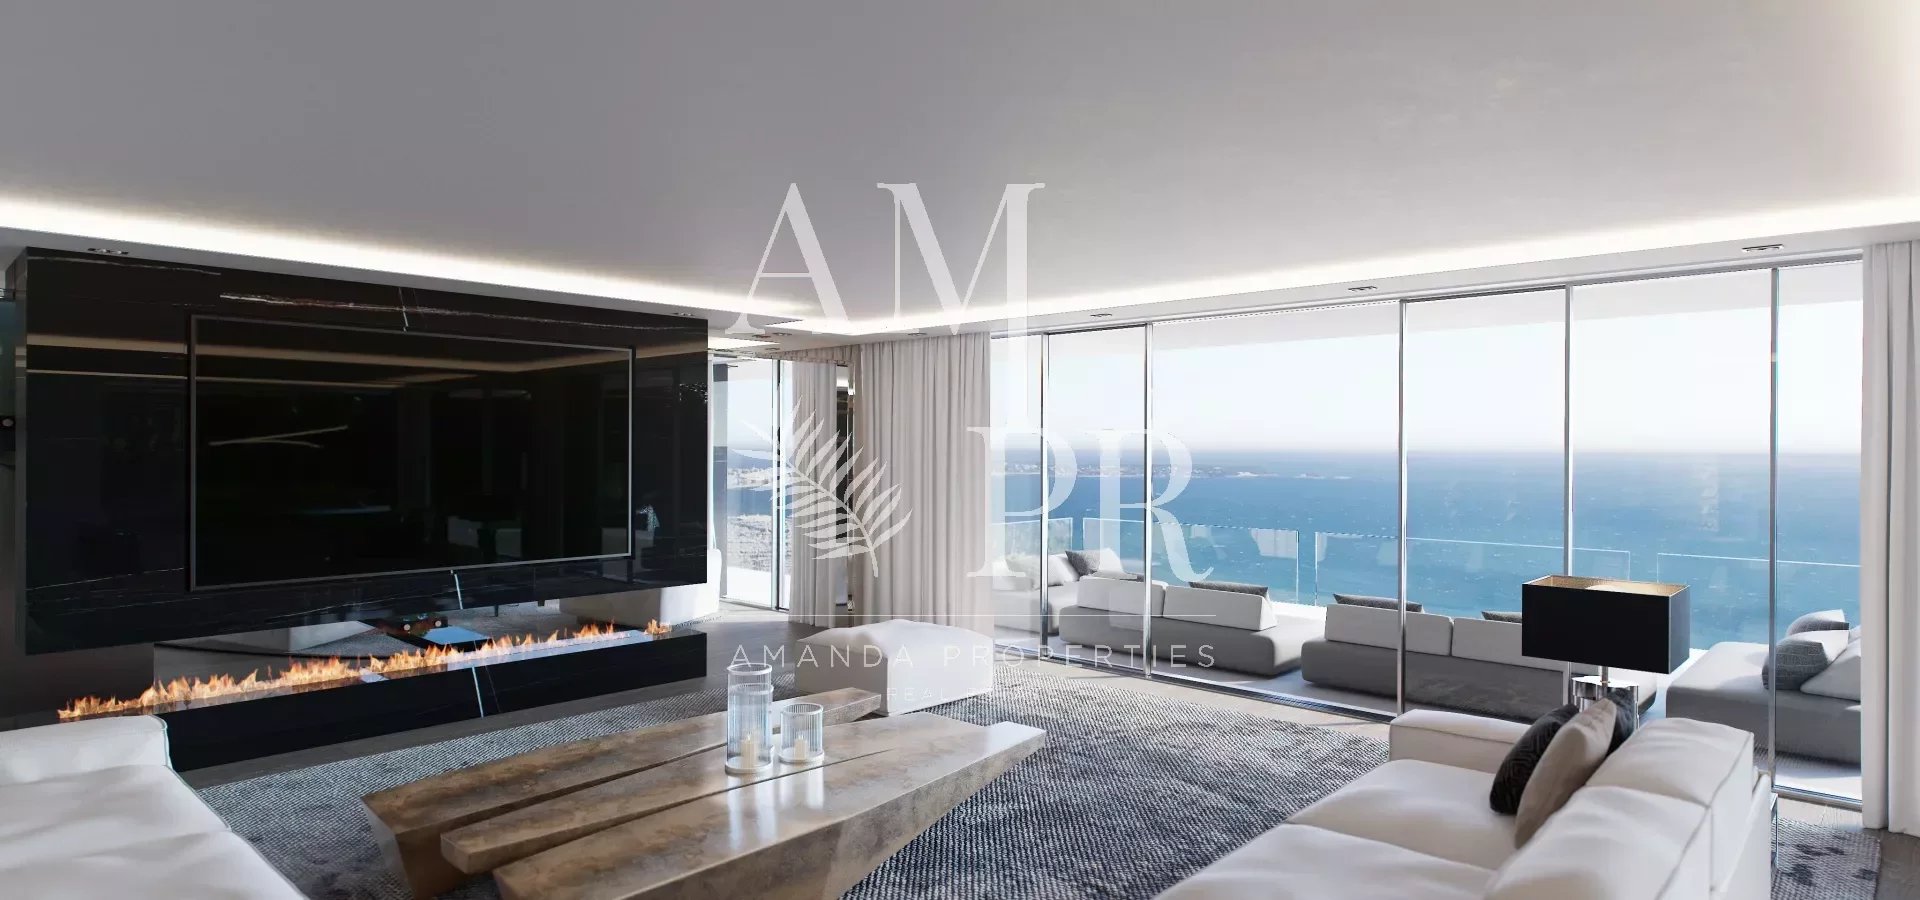 SUPER CANNES - OUTSTANDING NEW VILLA - PANORAMIC SEA VIEW